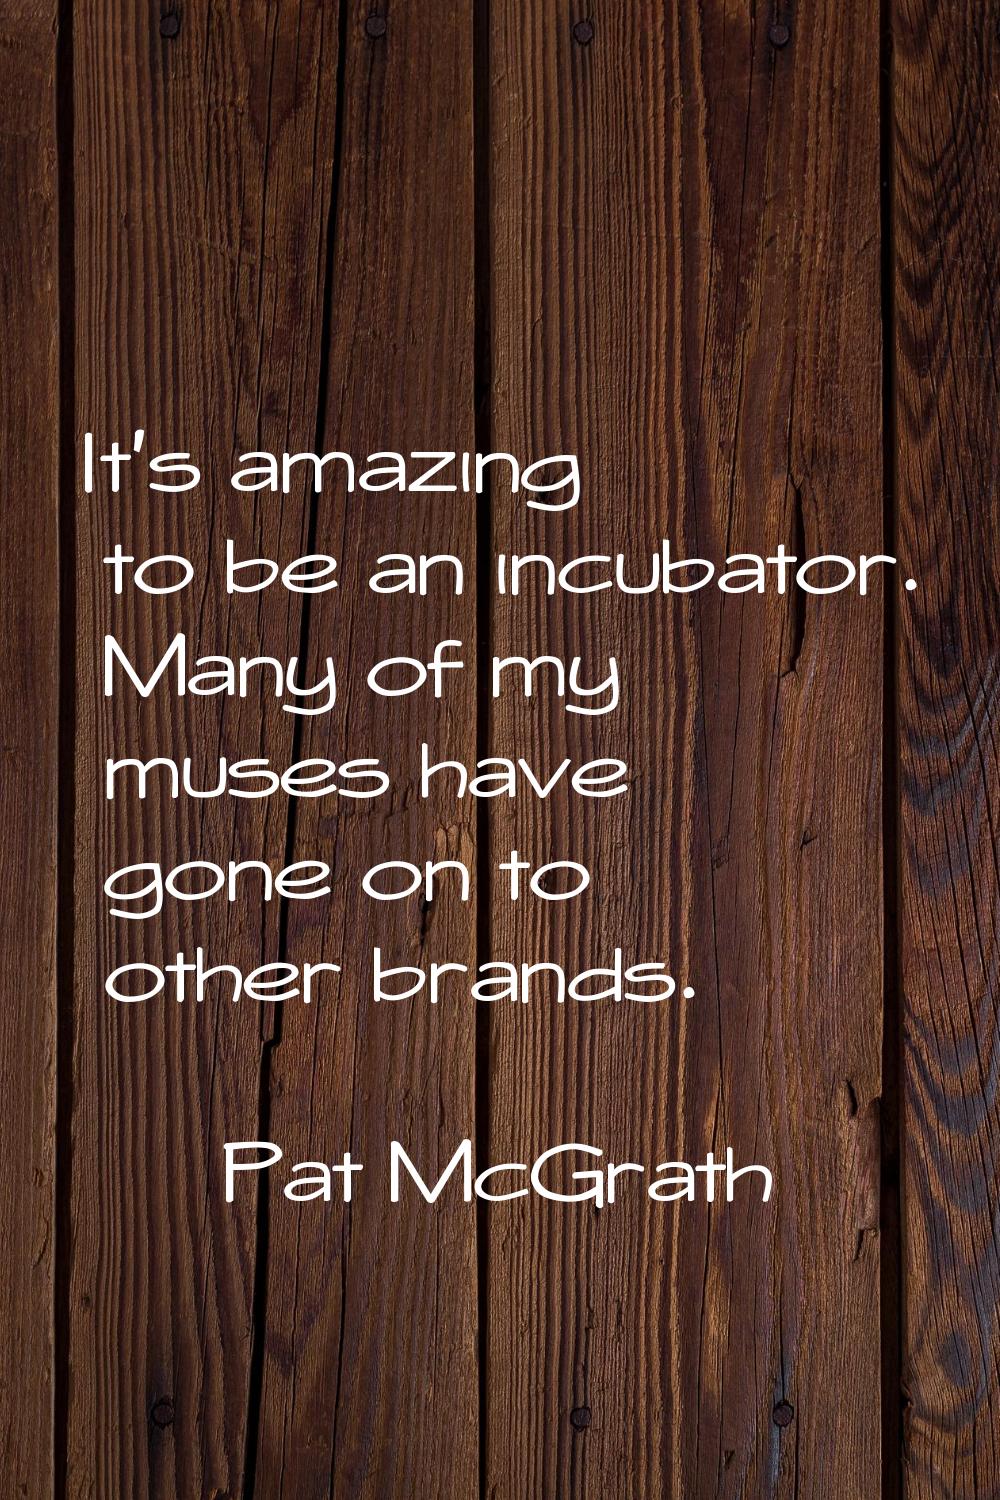 It's amazing to be an incubator. Many of my muses have gone on to other brands.